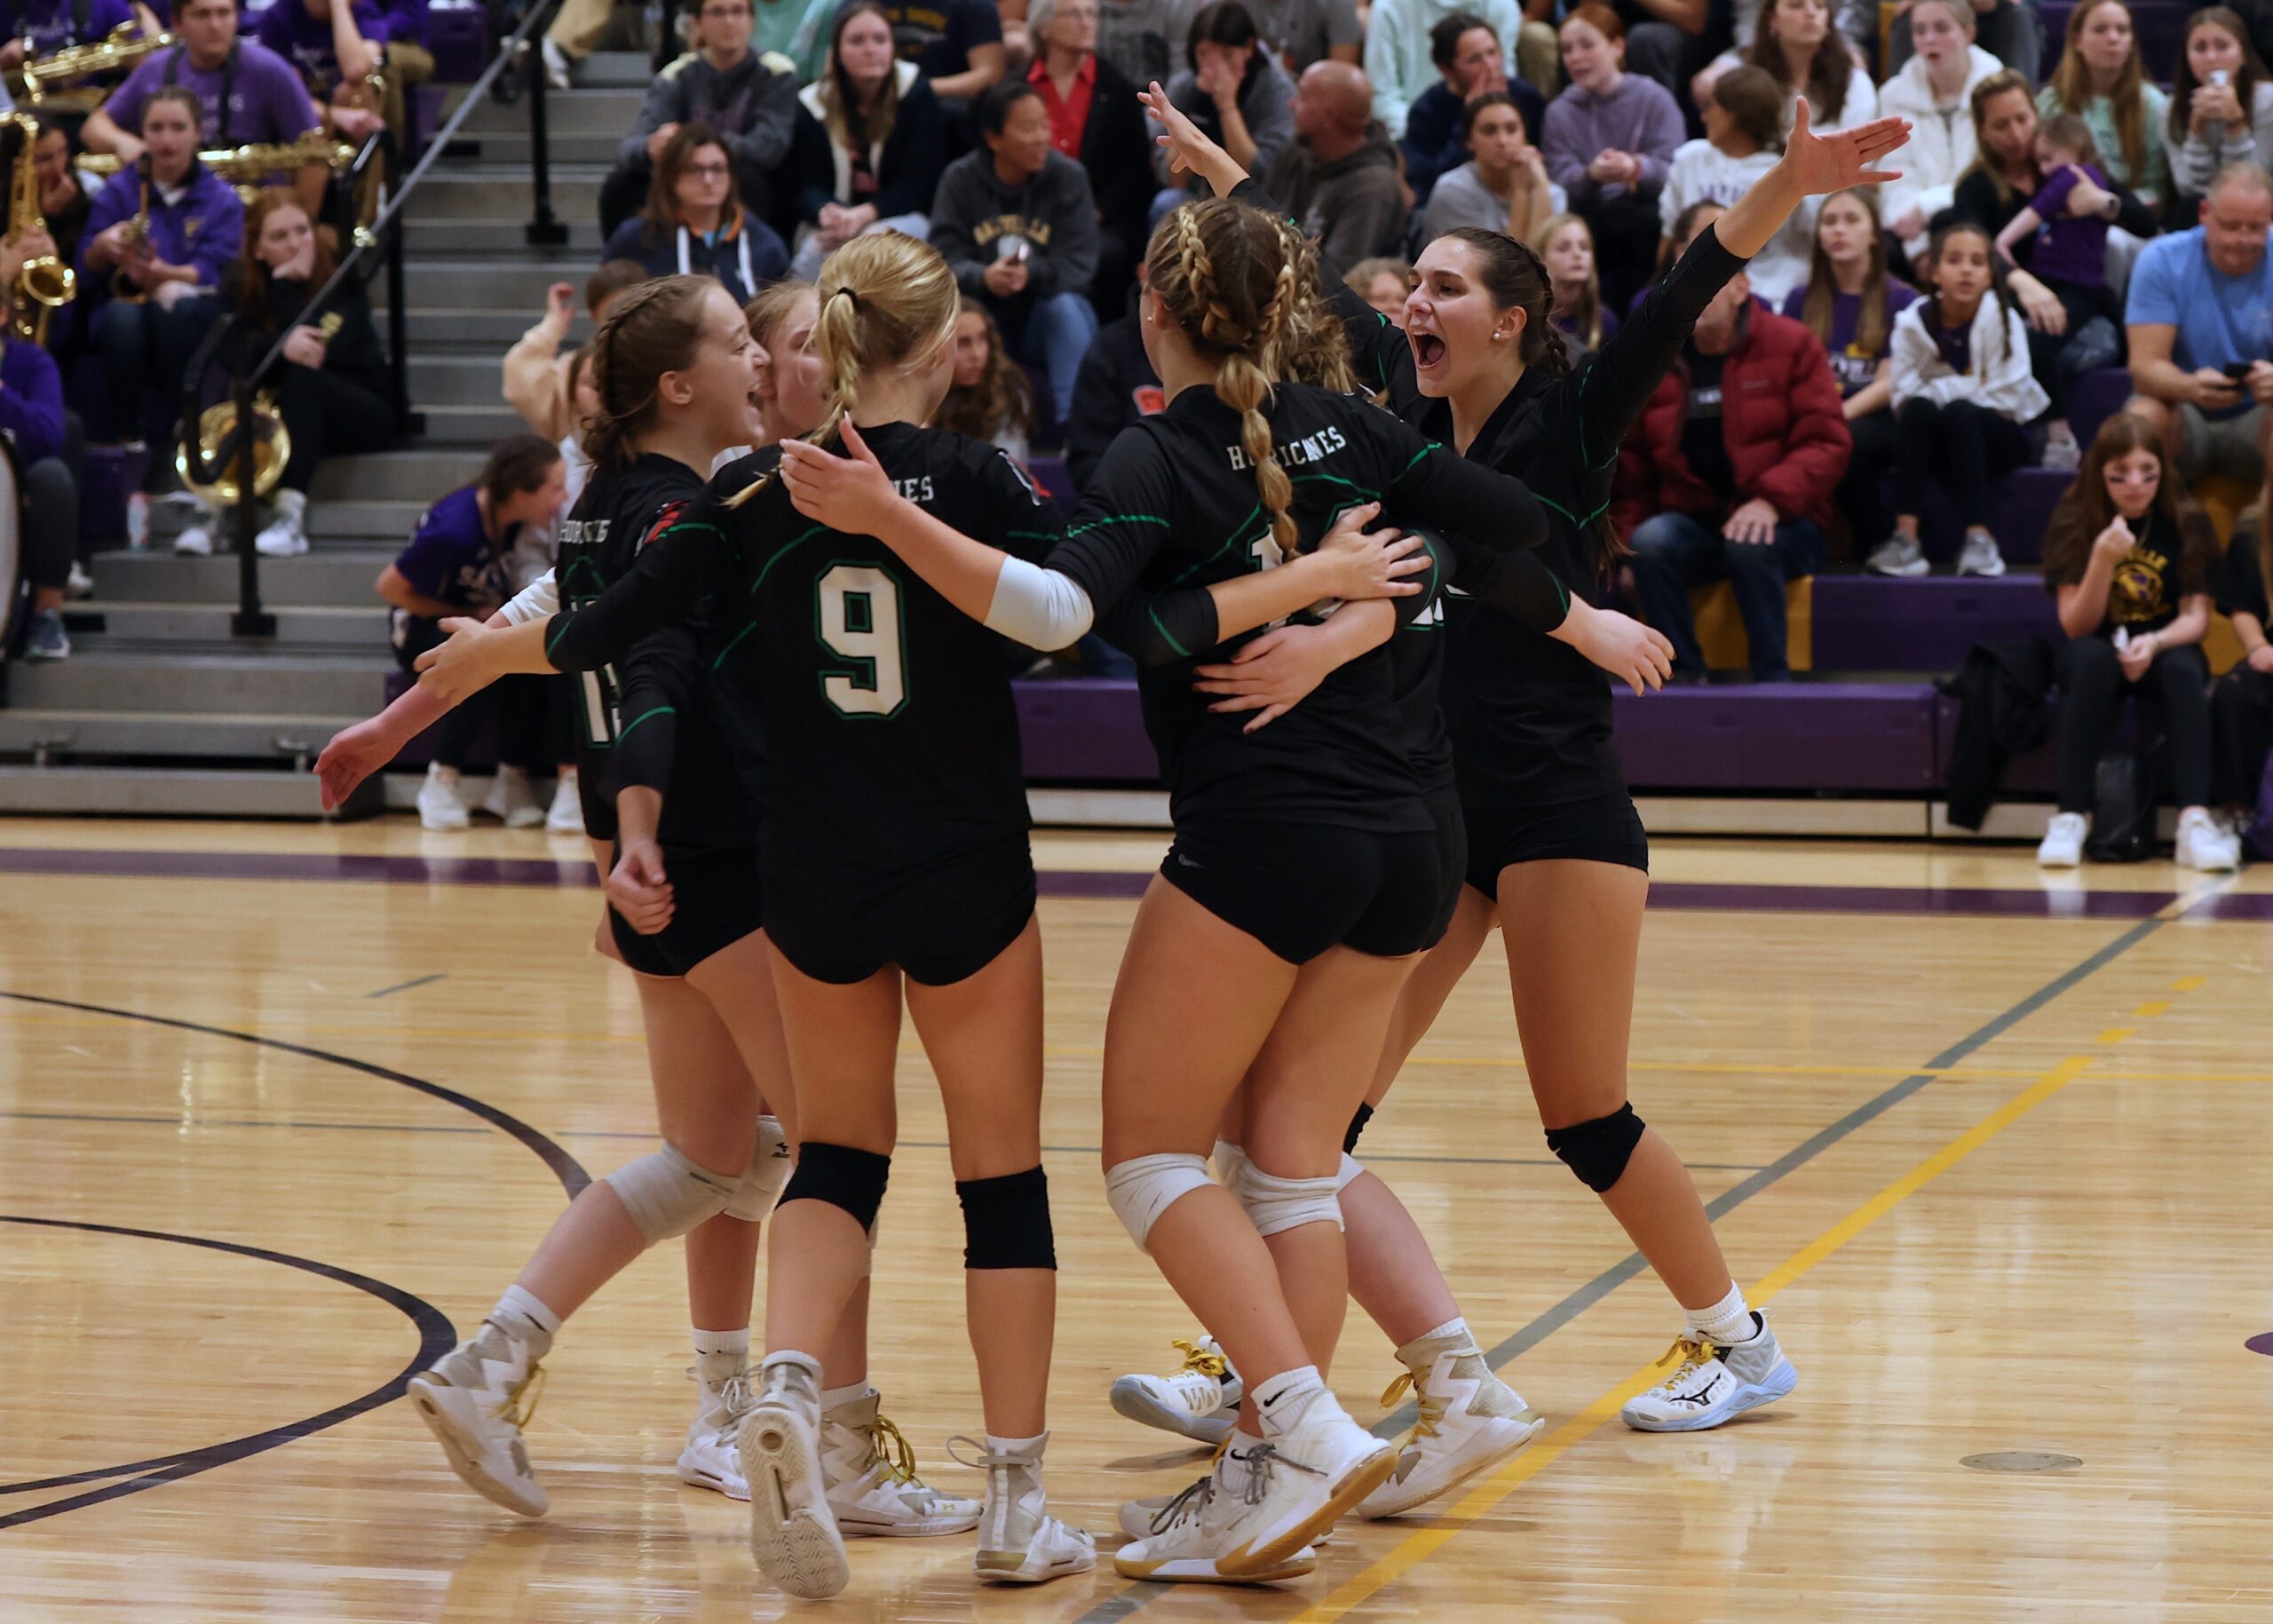 Westhampton Beach's girls volleyball team celebrates a point. MICHAEL O'CONNOR